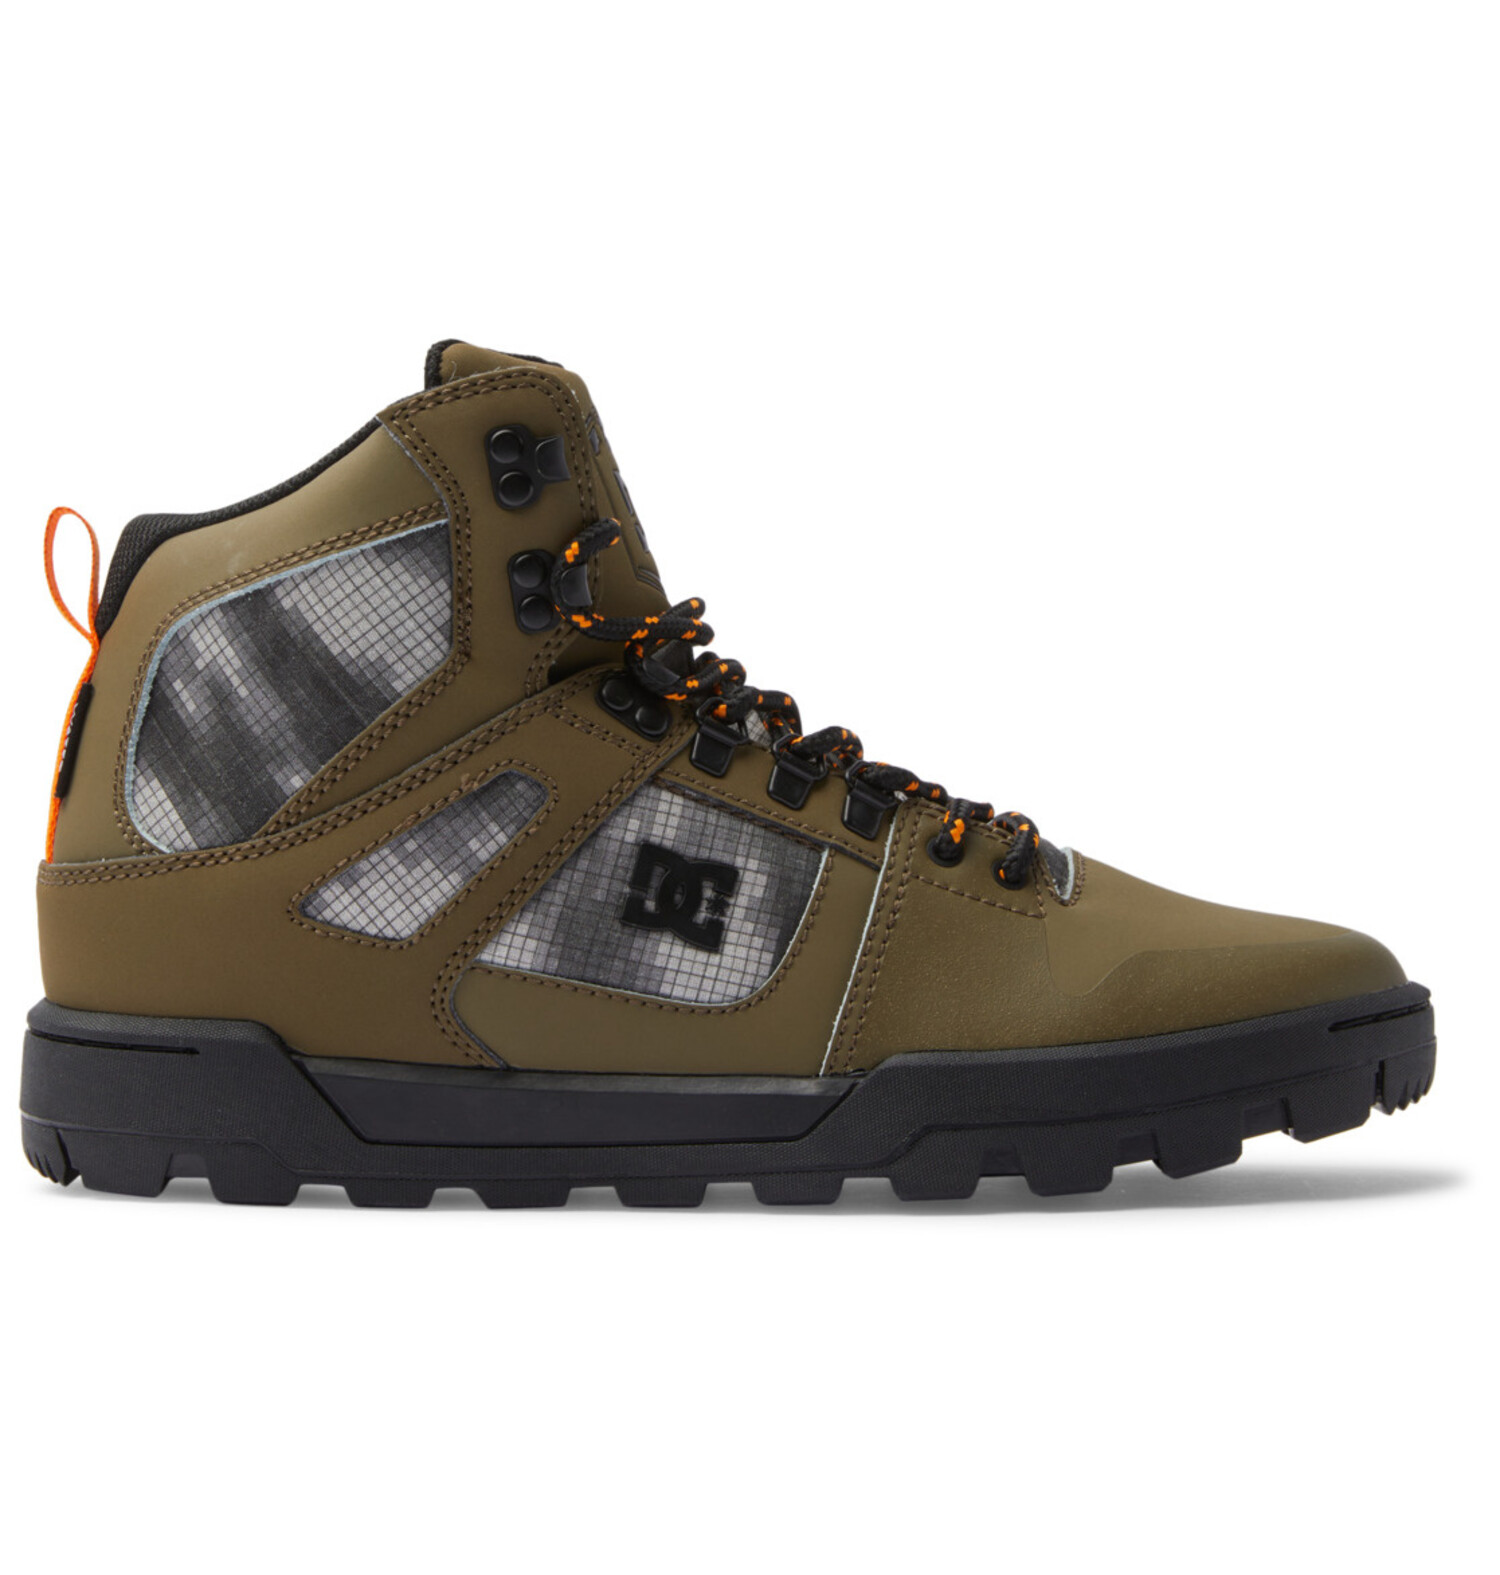 Shop All Insulated Boots